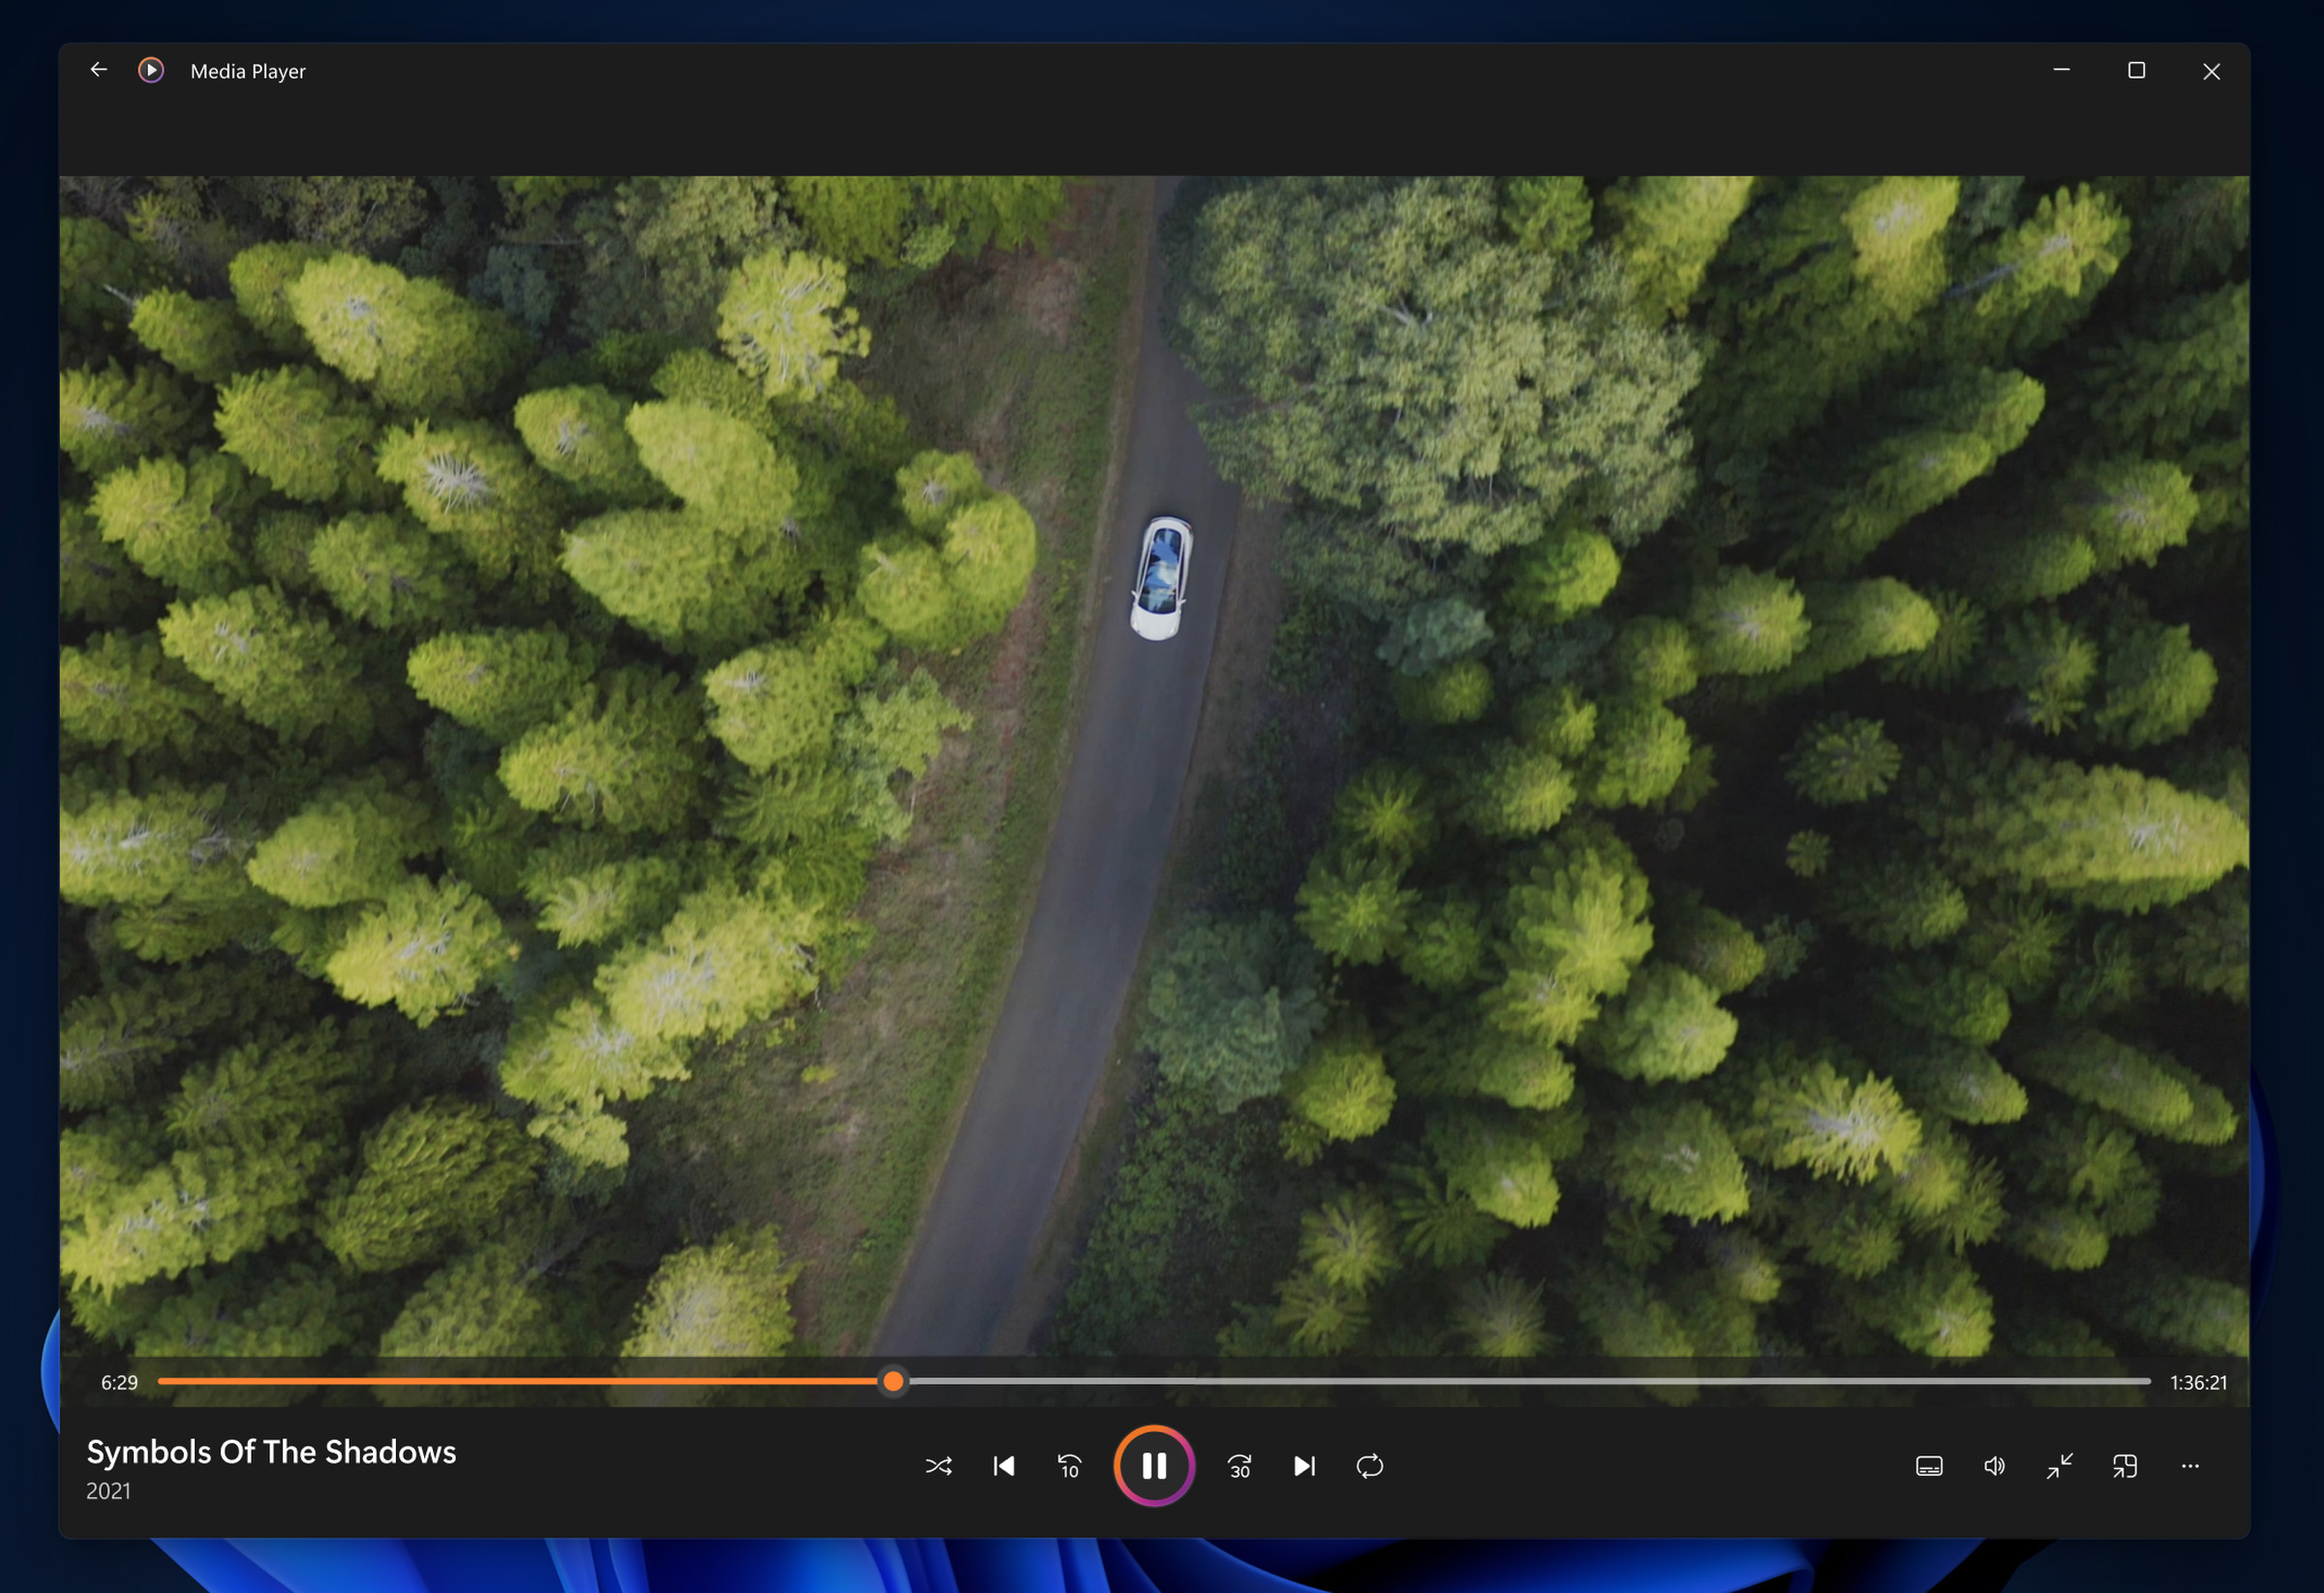 Video is also supported in this Windows 11 Media Player app.